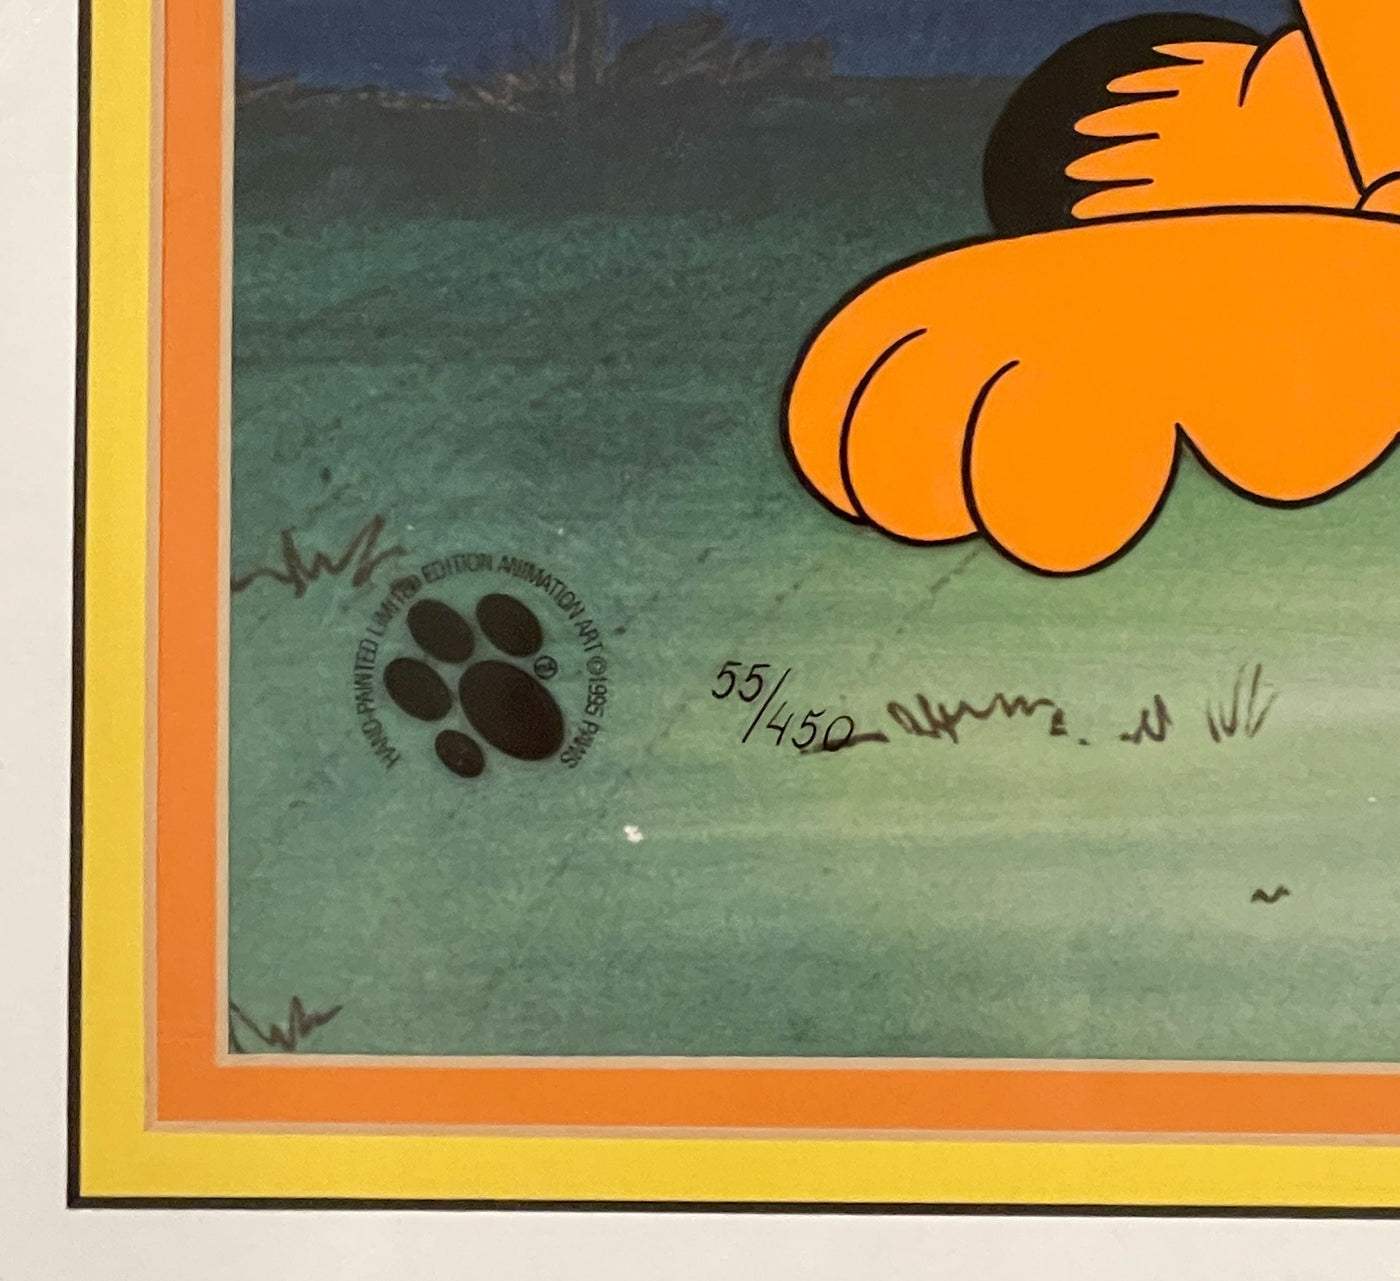 Paws INC Limited Edition Cel Featuring Garfield and Odie Signed by Jim Davis